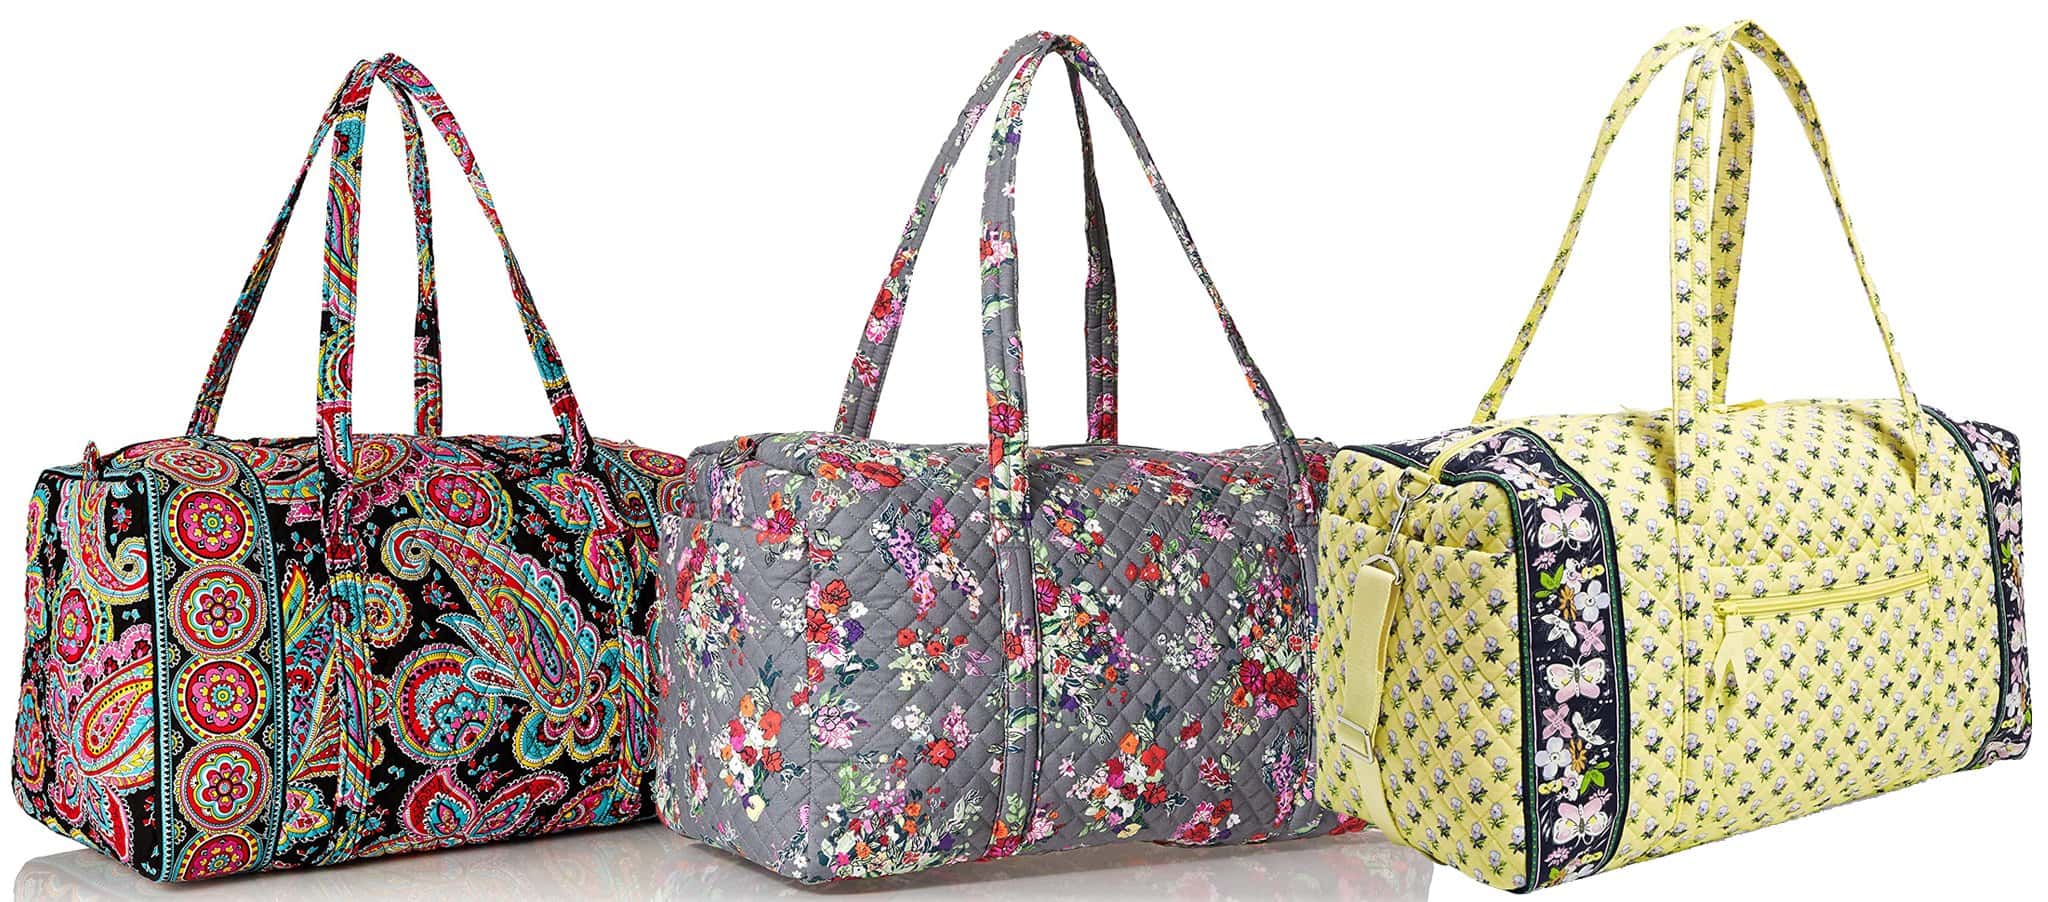 Perfect for a long weekend or adventure getaway, Vera Bradley's Large Travel Duffel will help you pack in style